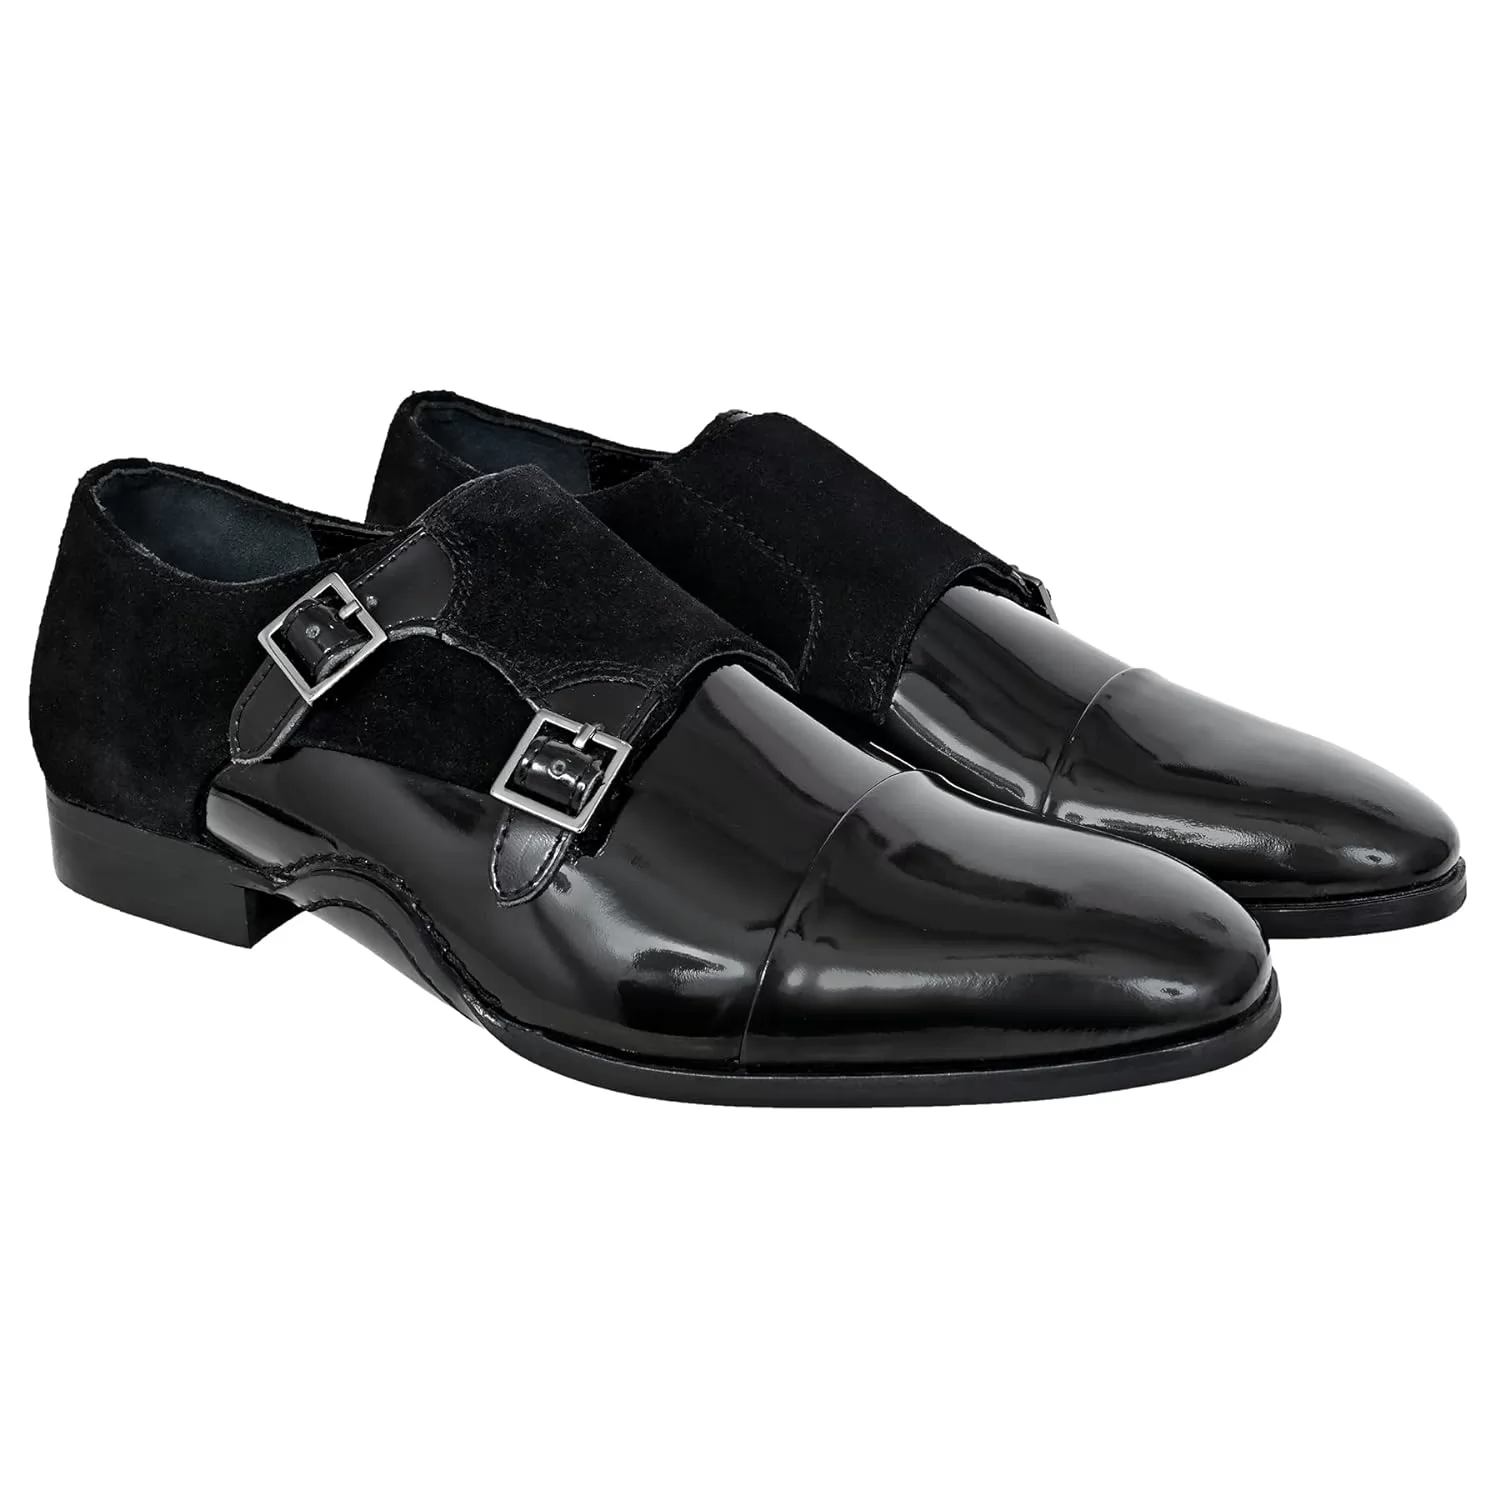  Hx London Formal & Party Patent Leather Monk Strap Shoes for Men